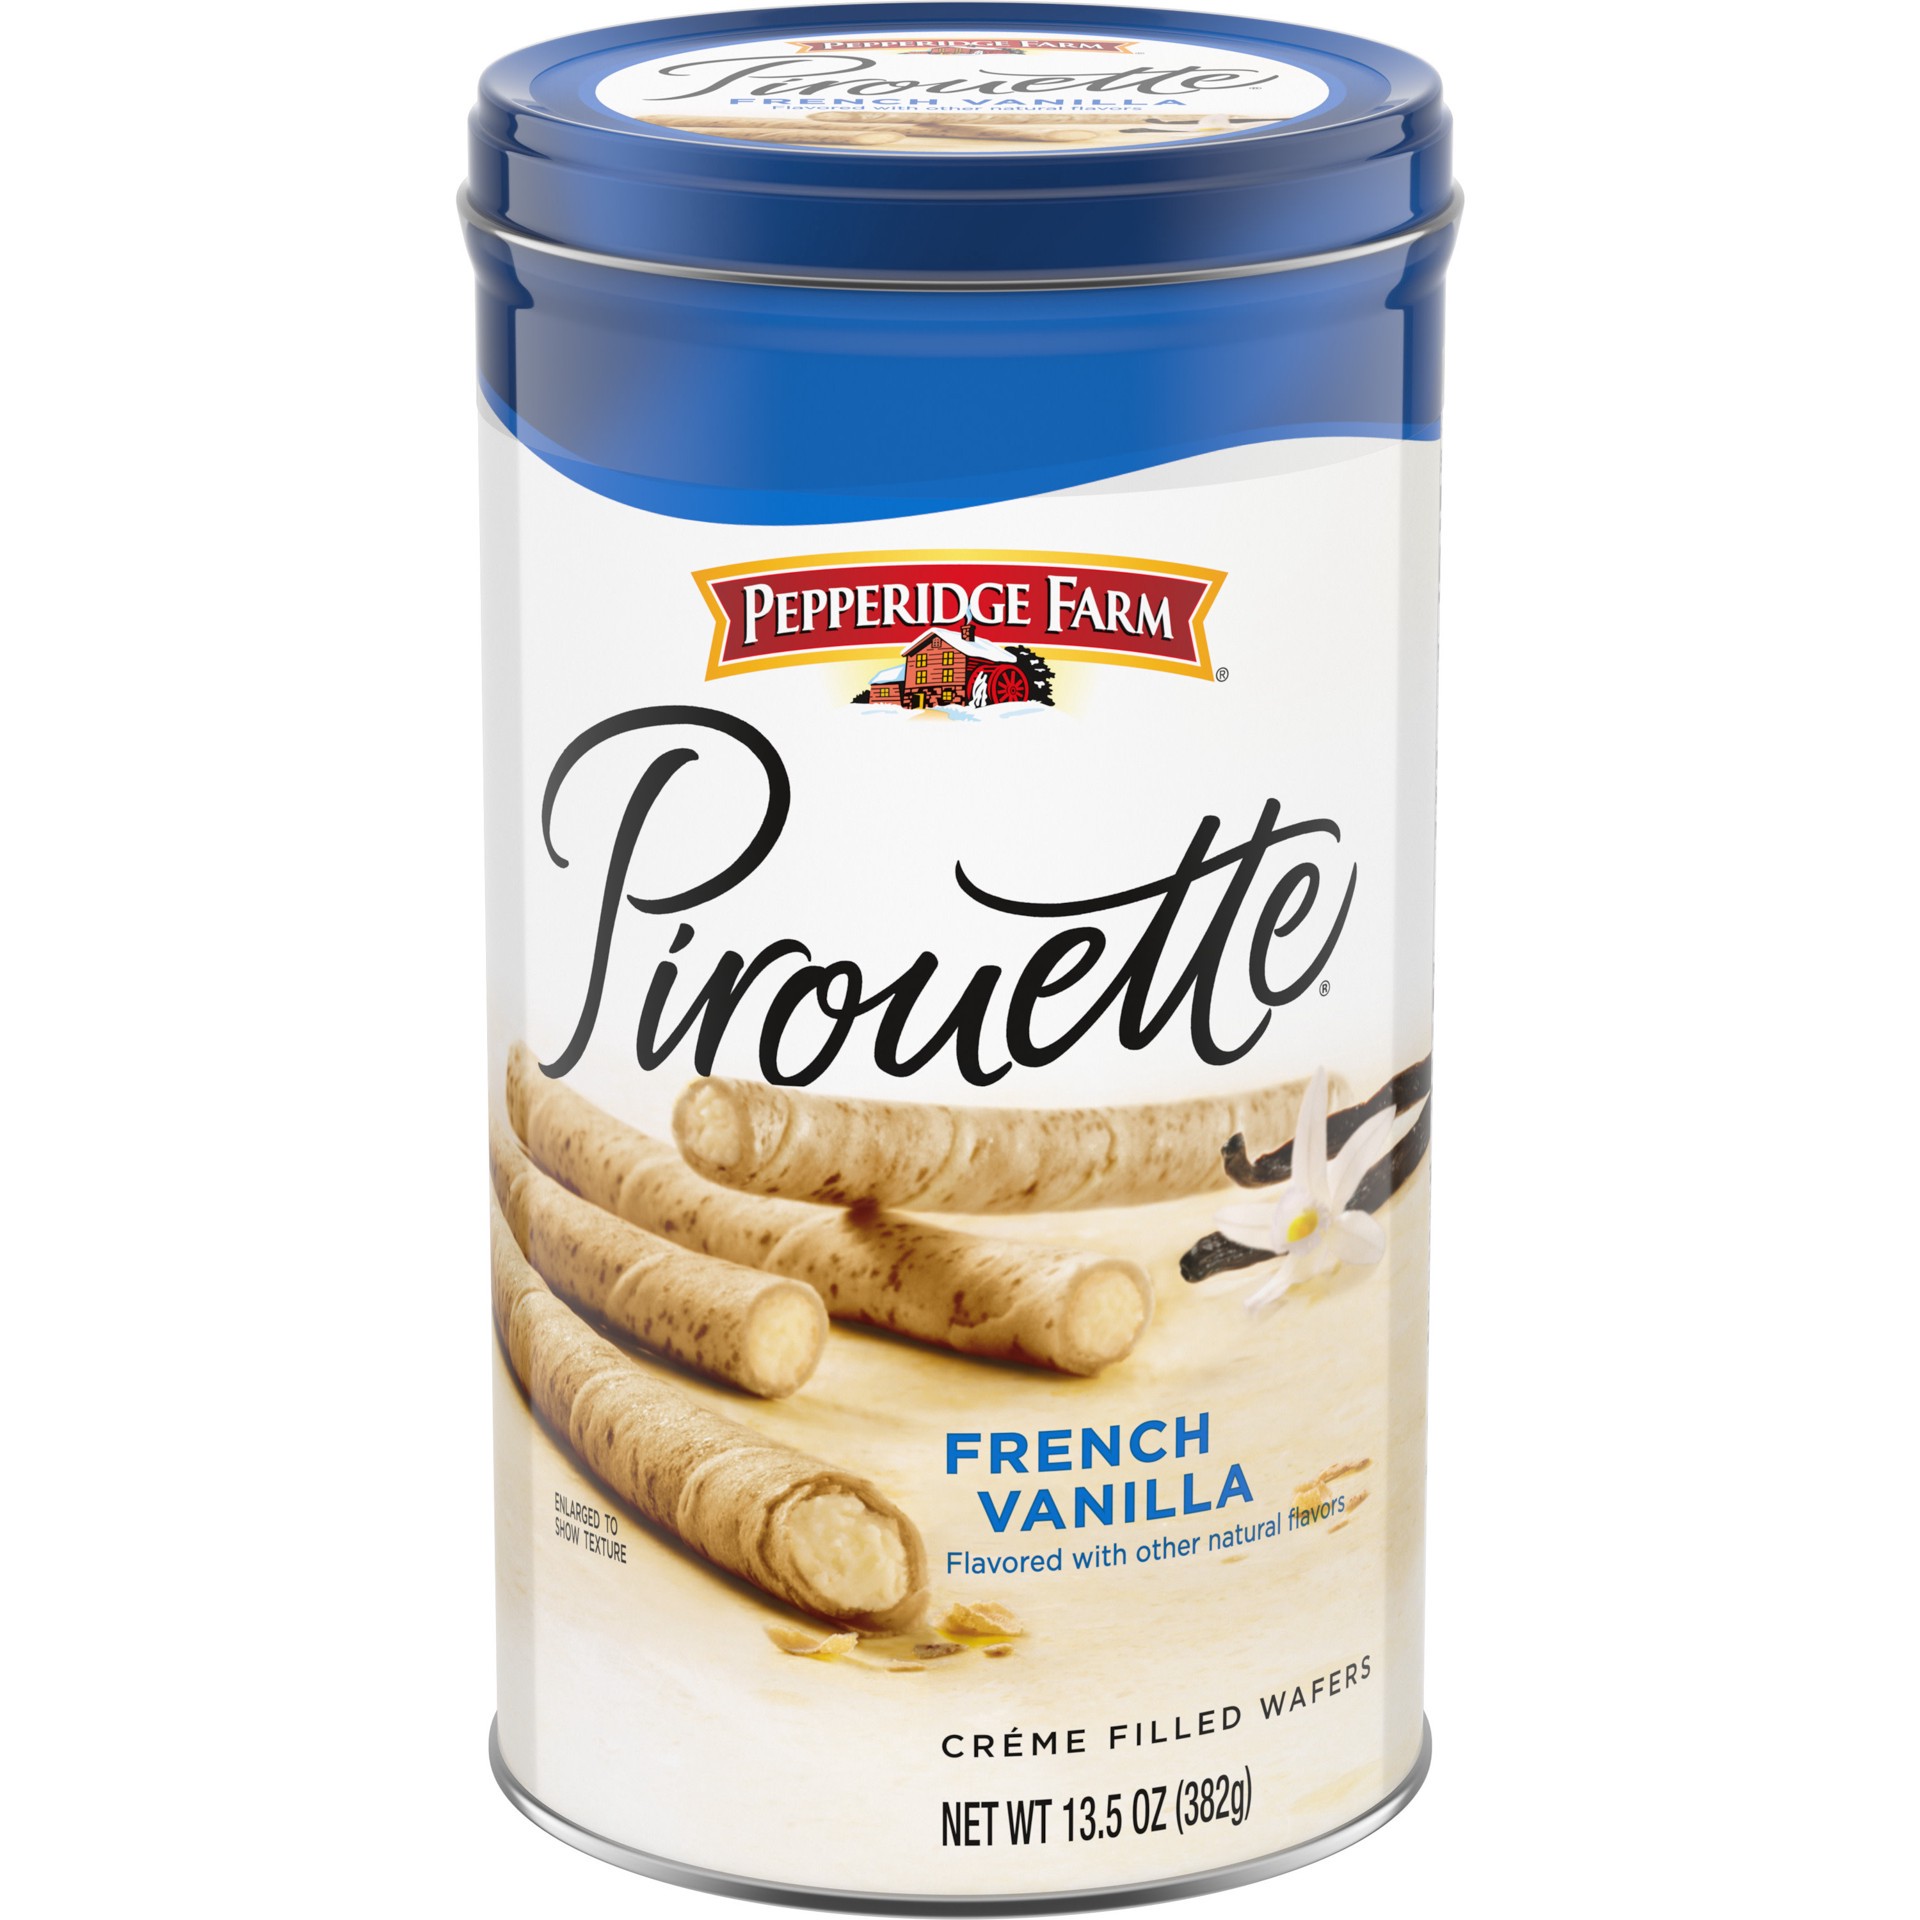 slide 1 of 5, Pepperidge Farm Pirouette Cookies, French Vanilla Flavored Crème Filled Wafers, 13.5 Oz Tin, 13.5 oz